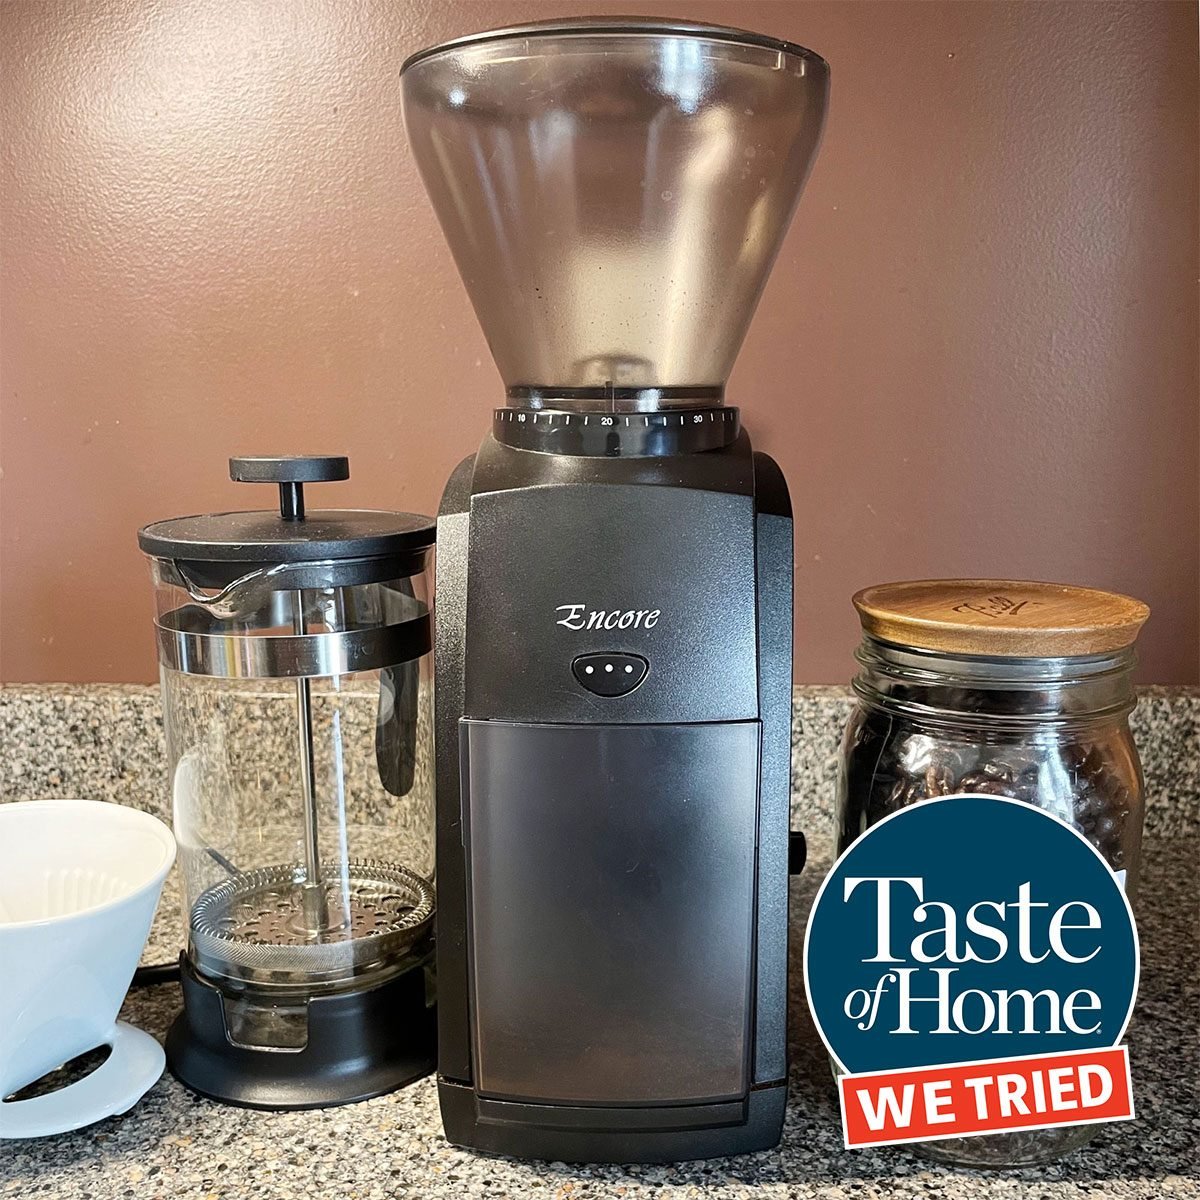 The Baratza Encore Grinder Review: Is It Still The Best?